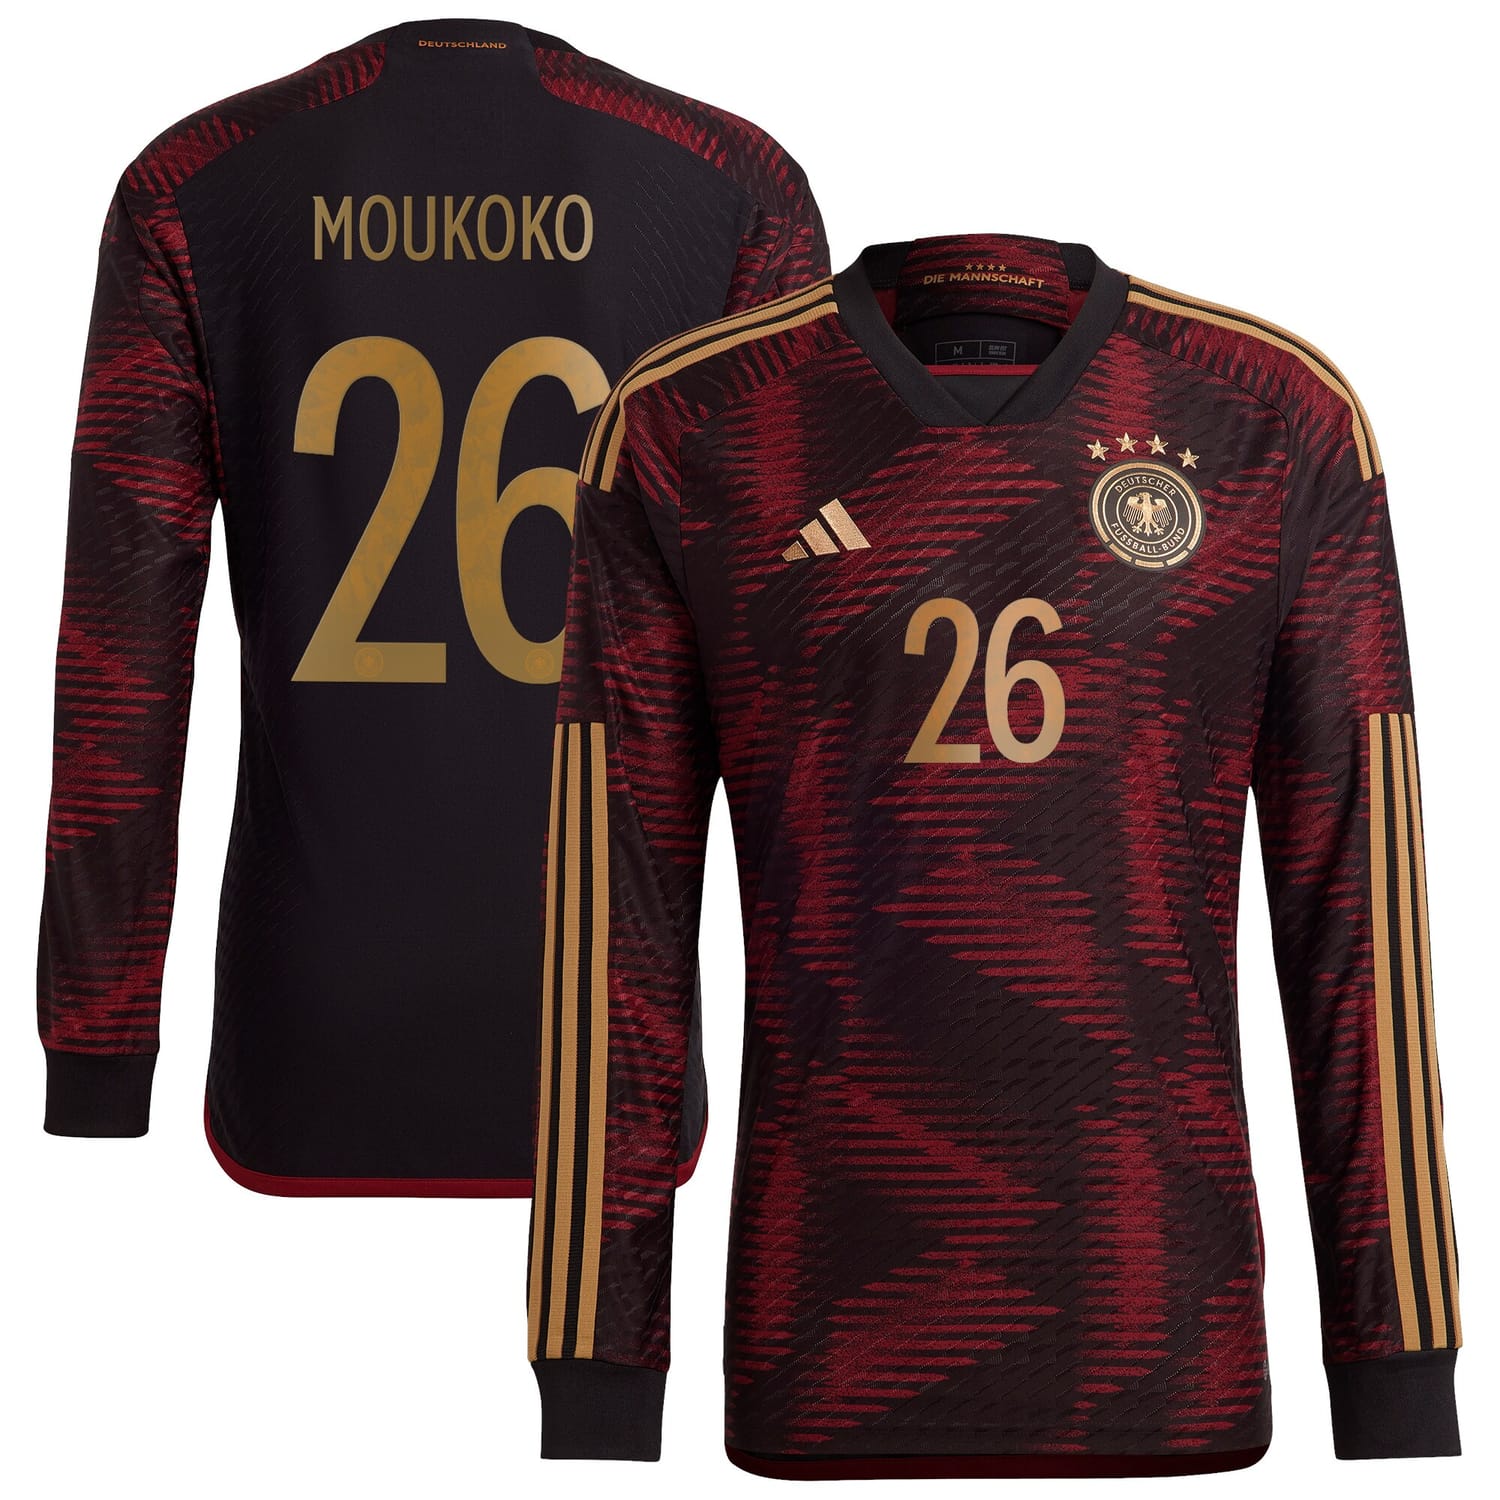 Germany National Team Away Authentic Jersey Shirt Long Sleeve 2022 player Youssoufa Moukoko 26 printing for Men